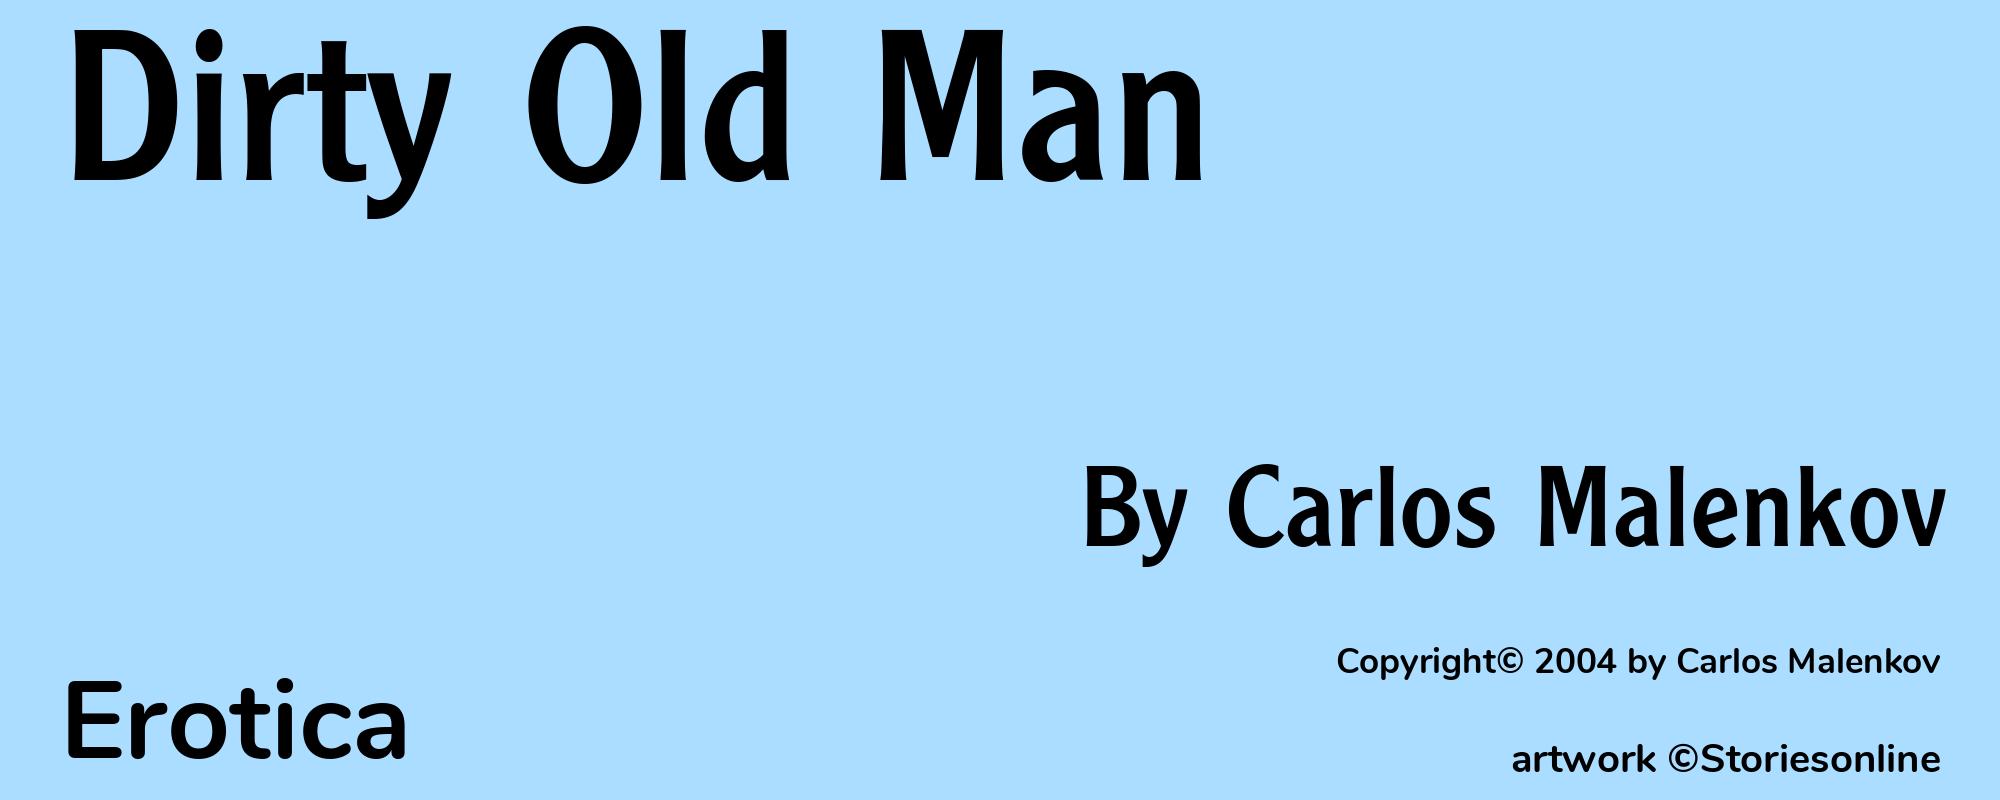 Dirty Old Man - Cover